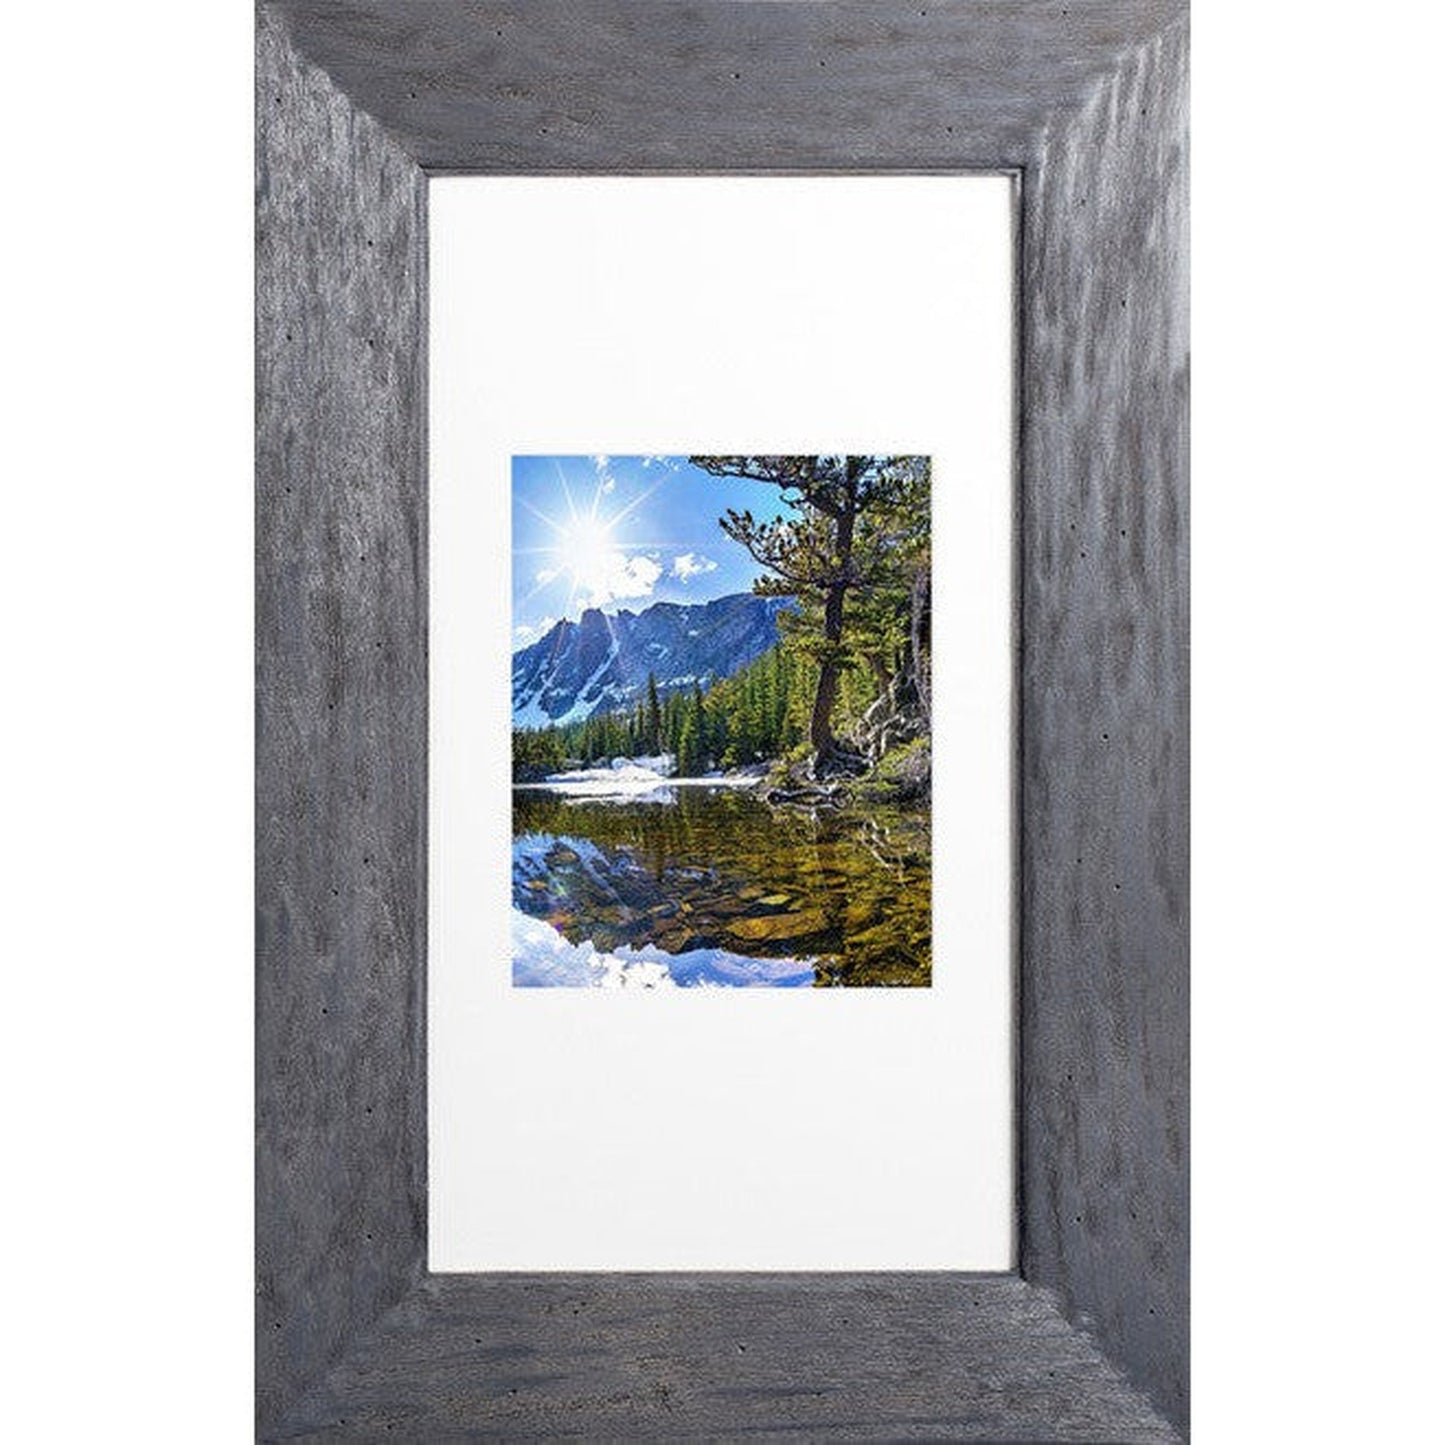 Fox Hollow Furnishings 14" x 24" Rustic Gray Extra Large Standard 4" Depth White Interior Recessed Picture Frame Medicine Cabinet With Mirror and Black 8" x 10" Matting